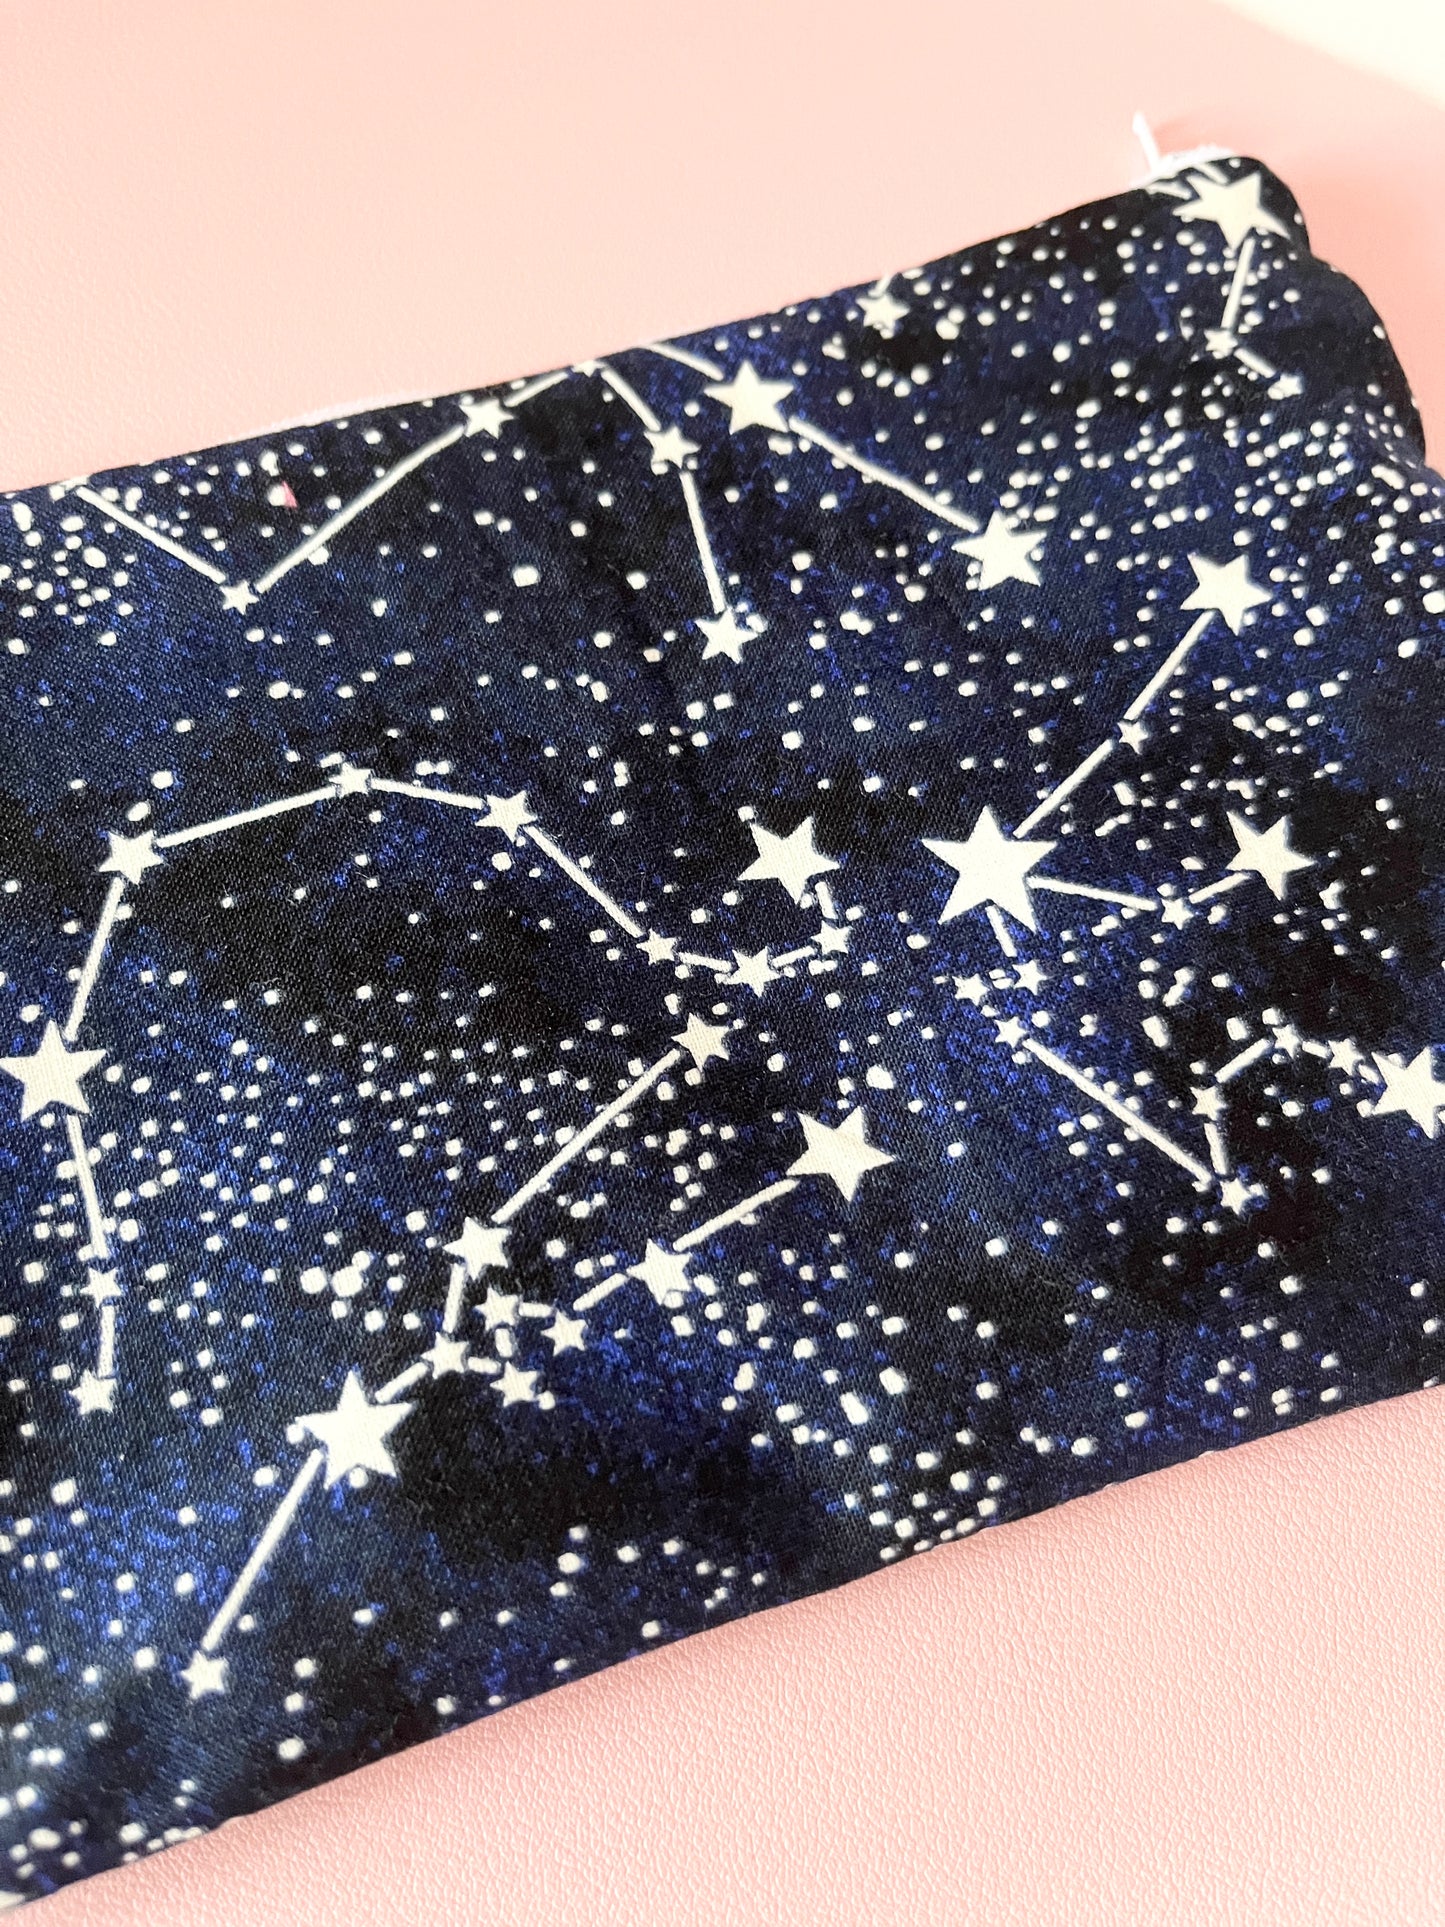 Constellations Glow in the Dark Pencil Case Pouch